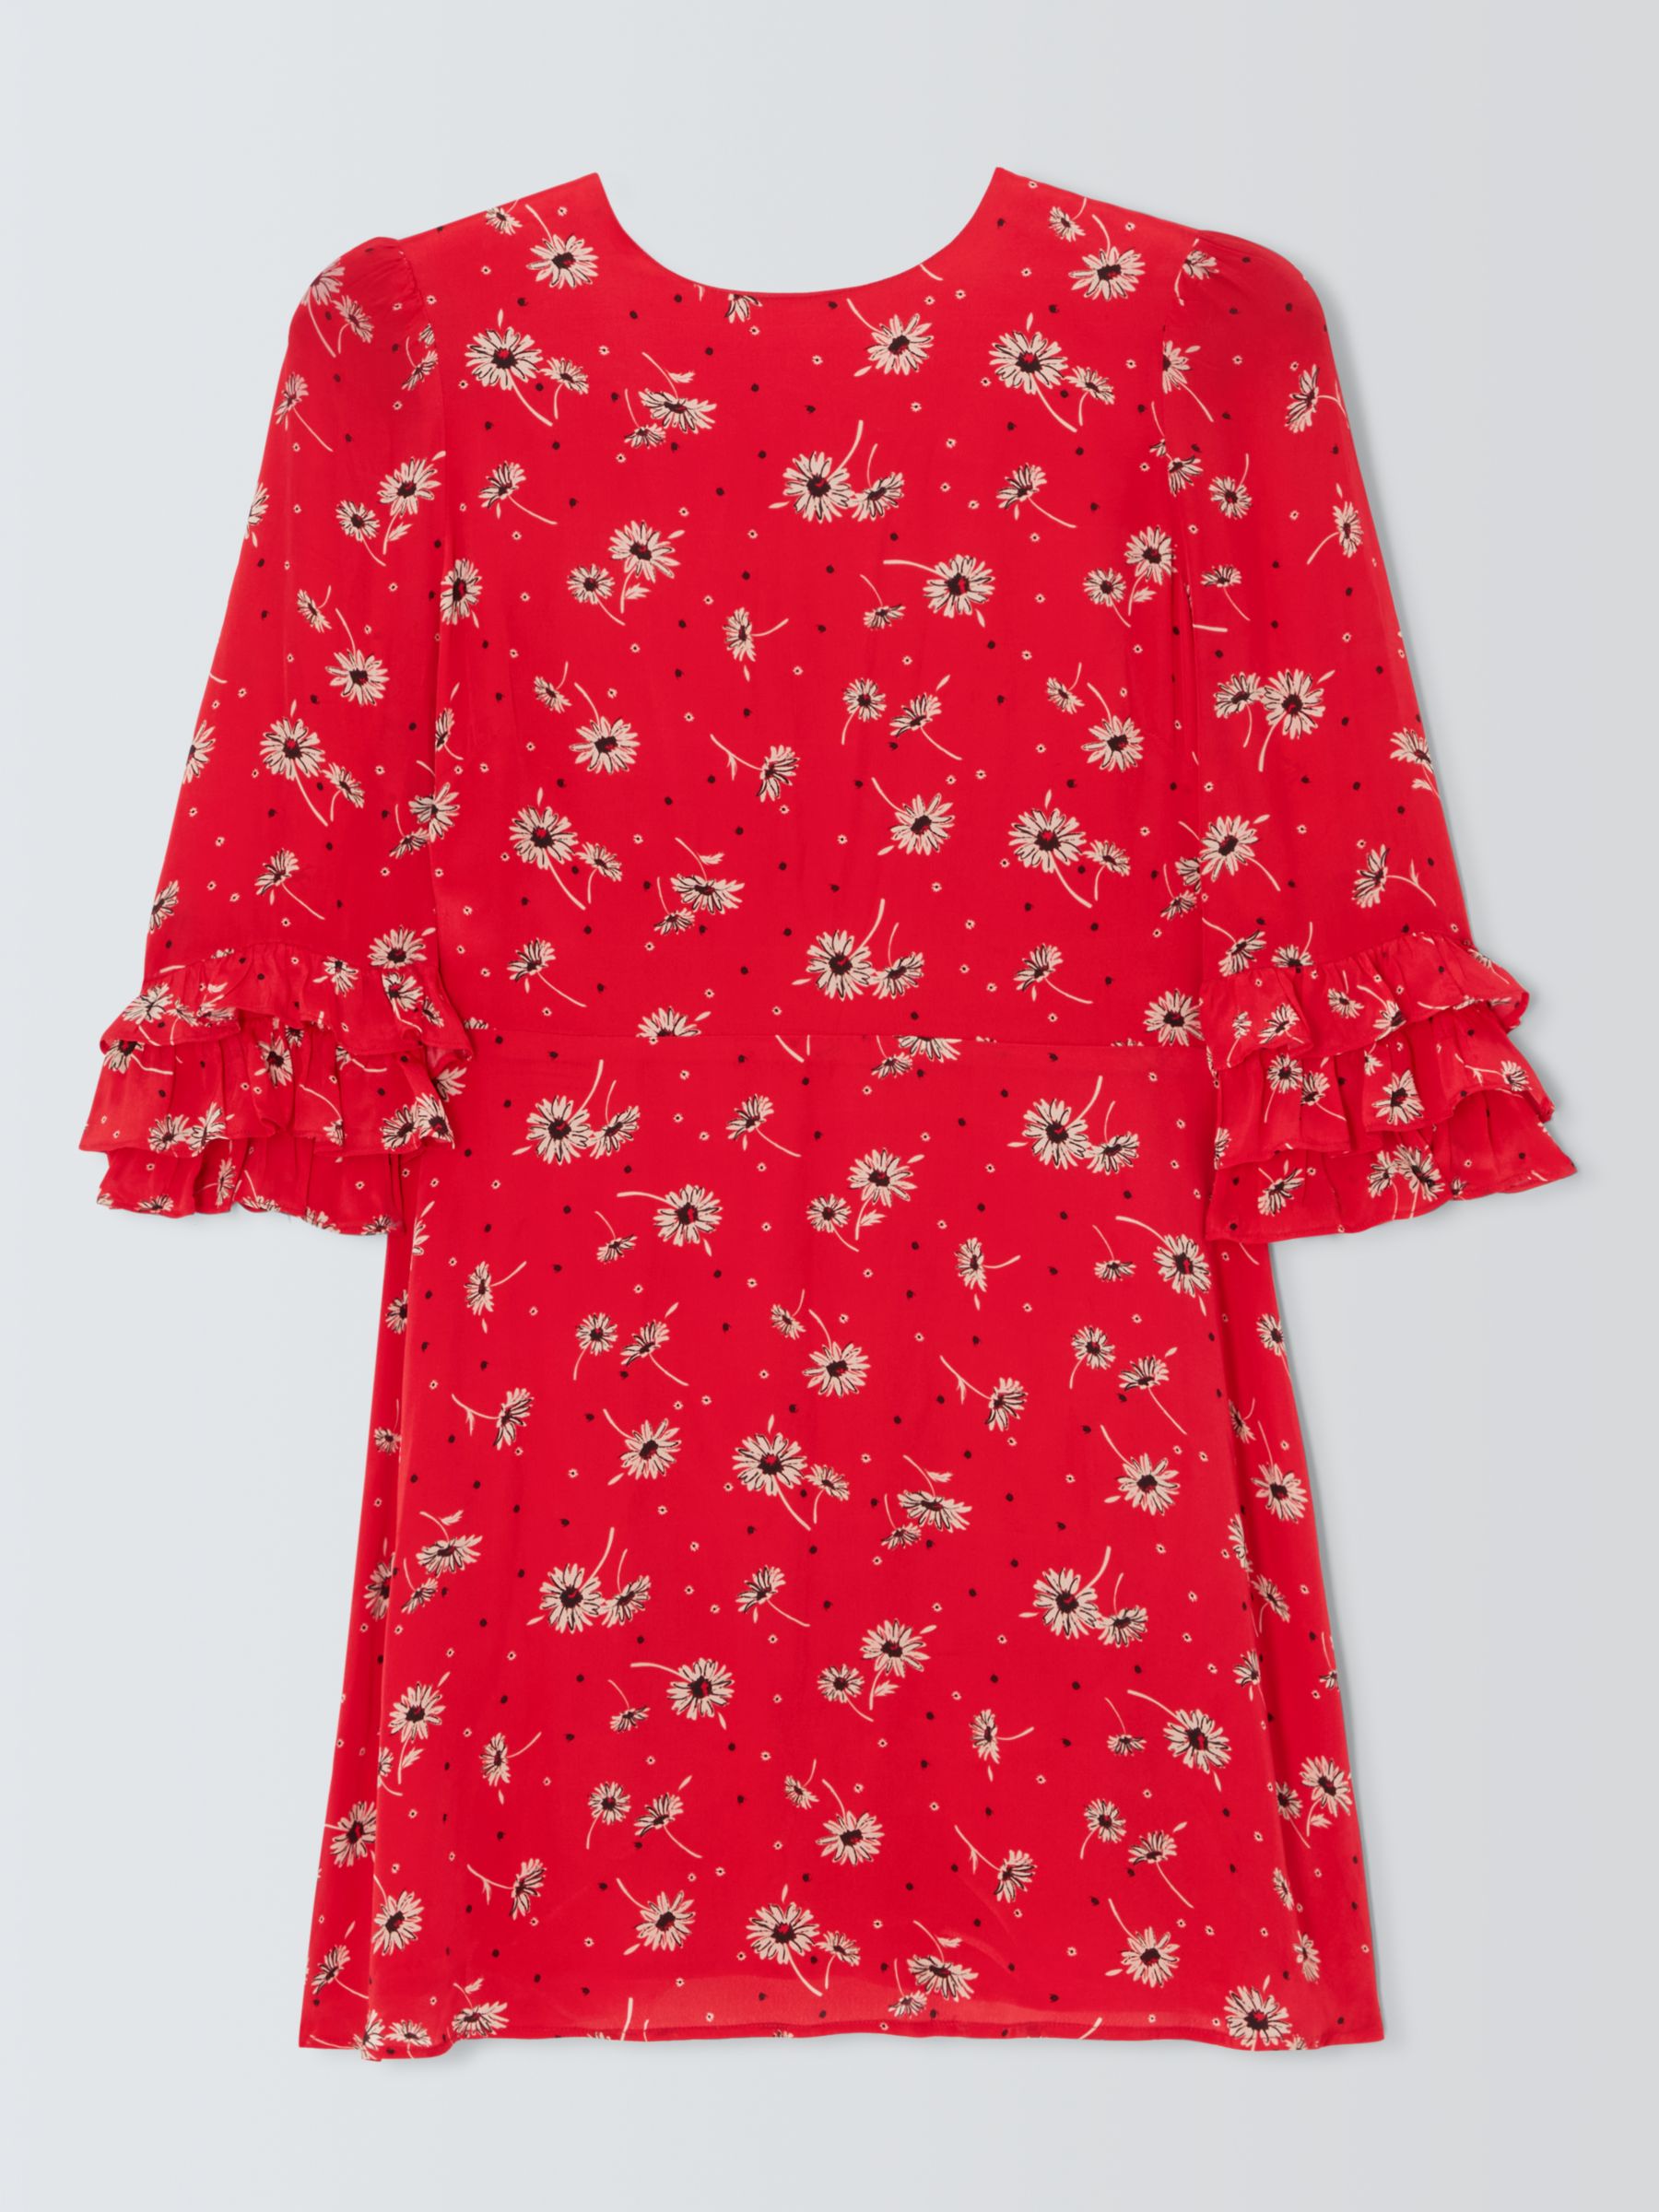 Buy Queens of archive Peggy Daisy Print Mini Dress, Red/Multi Online at johnlewis.com